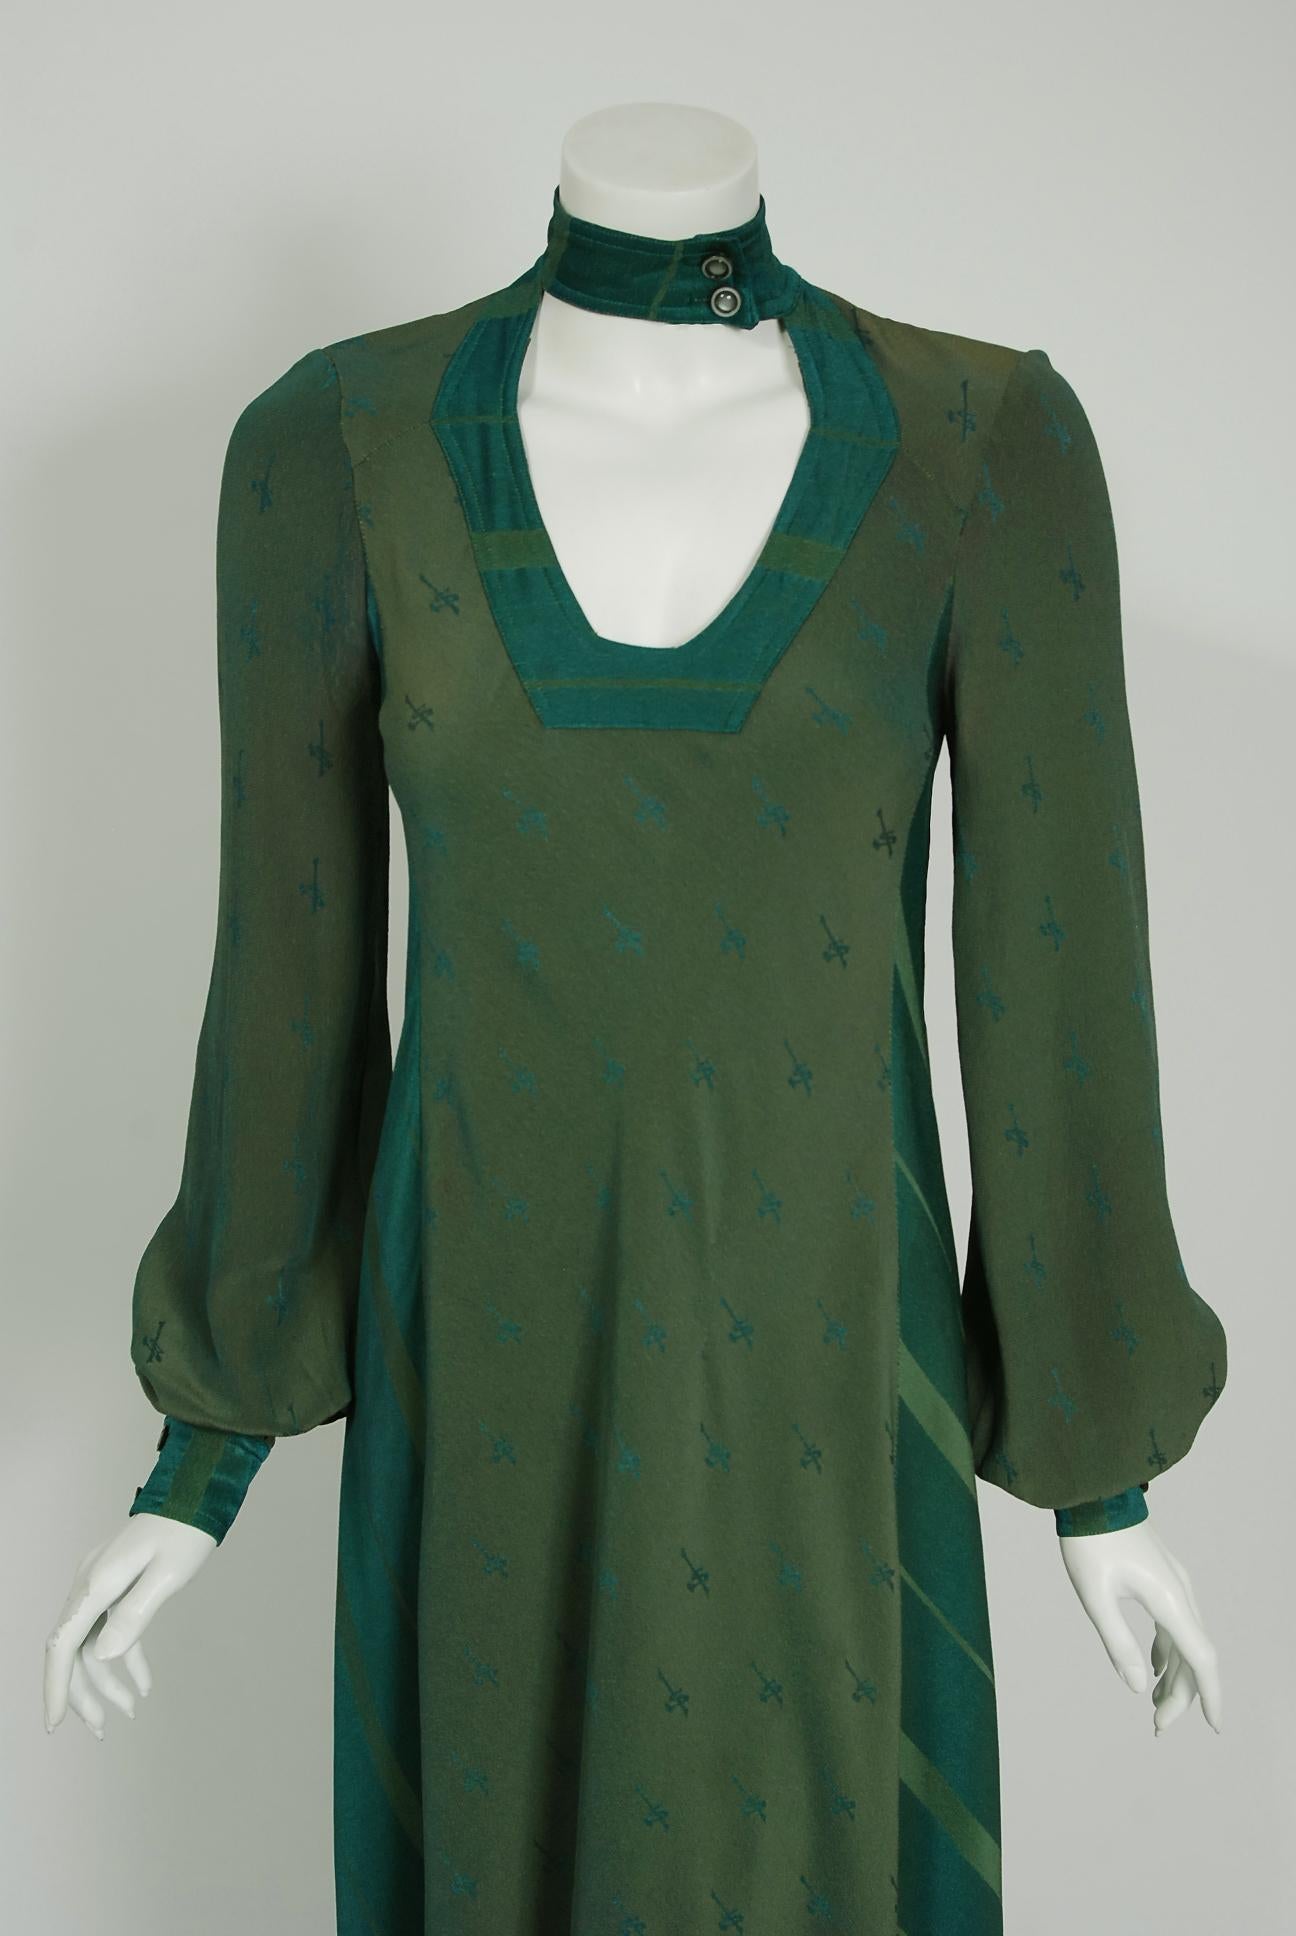 Breathtaking hunter green maxi dress by the famous Alice Pollock British label. Pollock is known for starting Quorum, a London boutique and manufacturing business, in 1964. The following year she was joined in the business by Ossie Clark and Celia